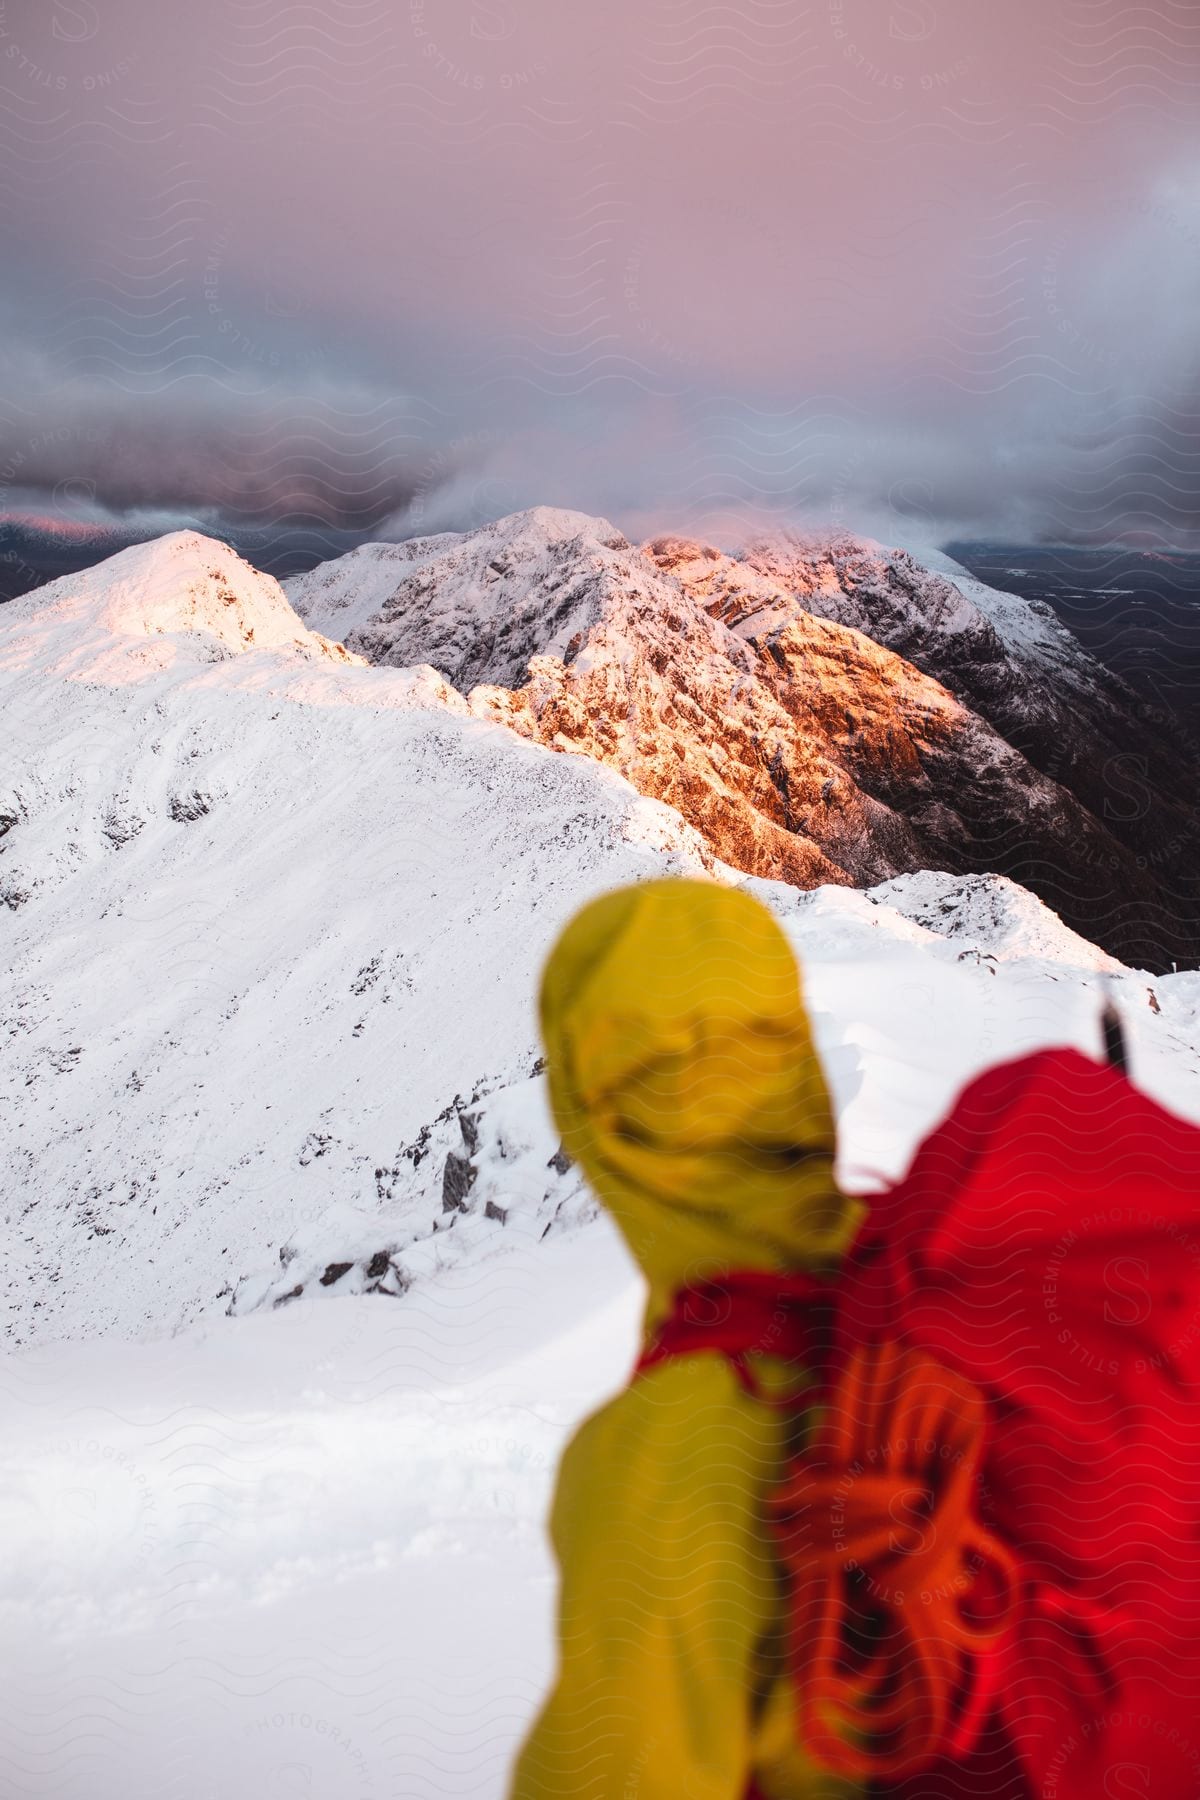 Hiker with red backpack and yellow jacket looks out over snowy mountains